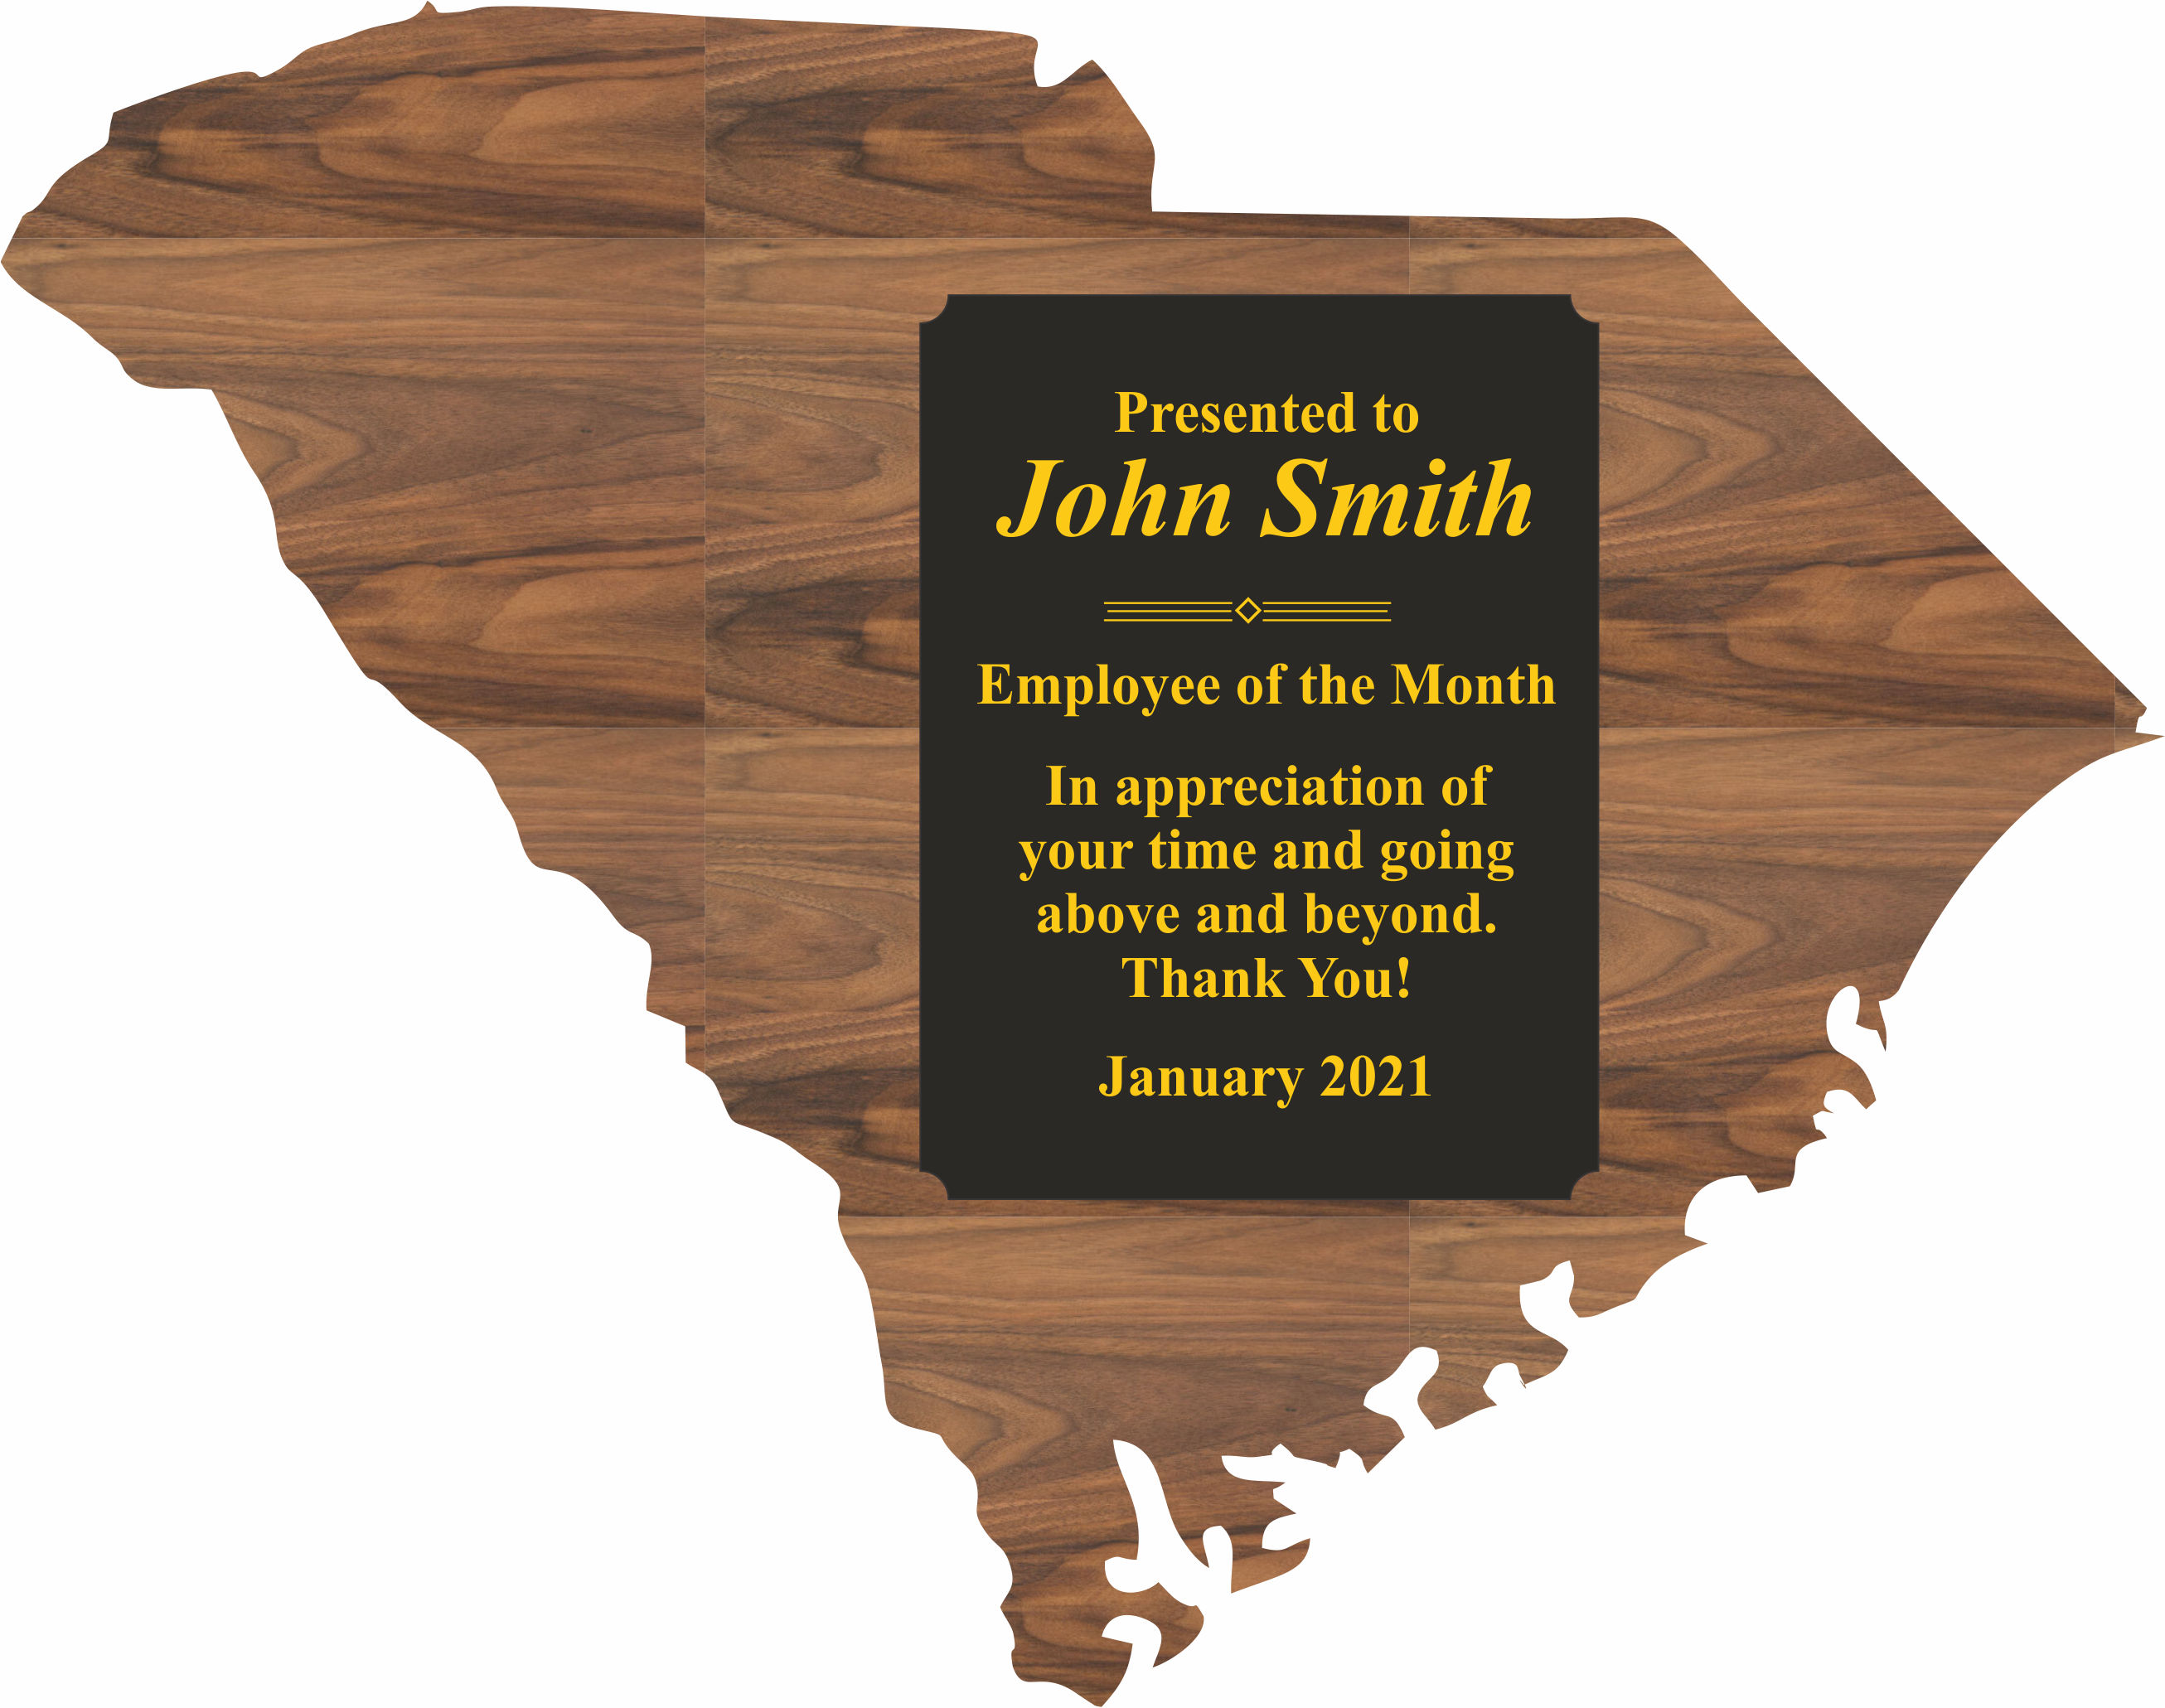 South Carolina State Shaped Plaques, Custom Engraved With Your Logo!